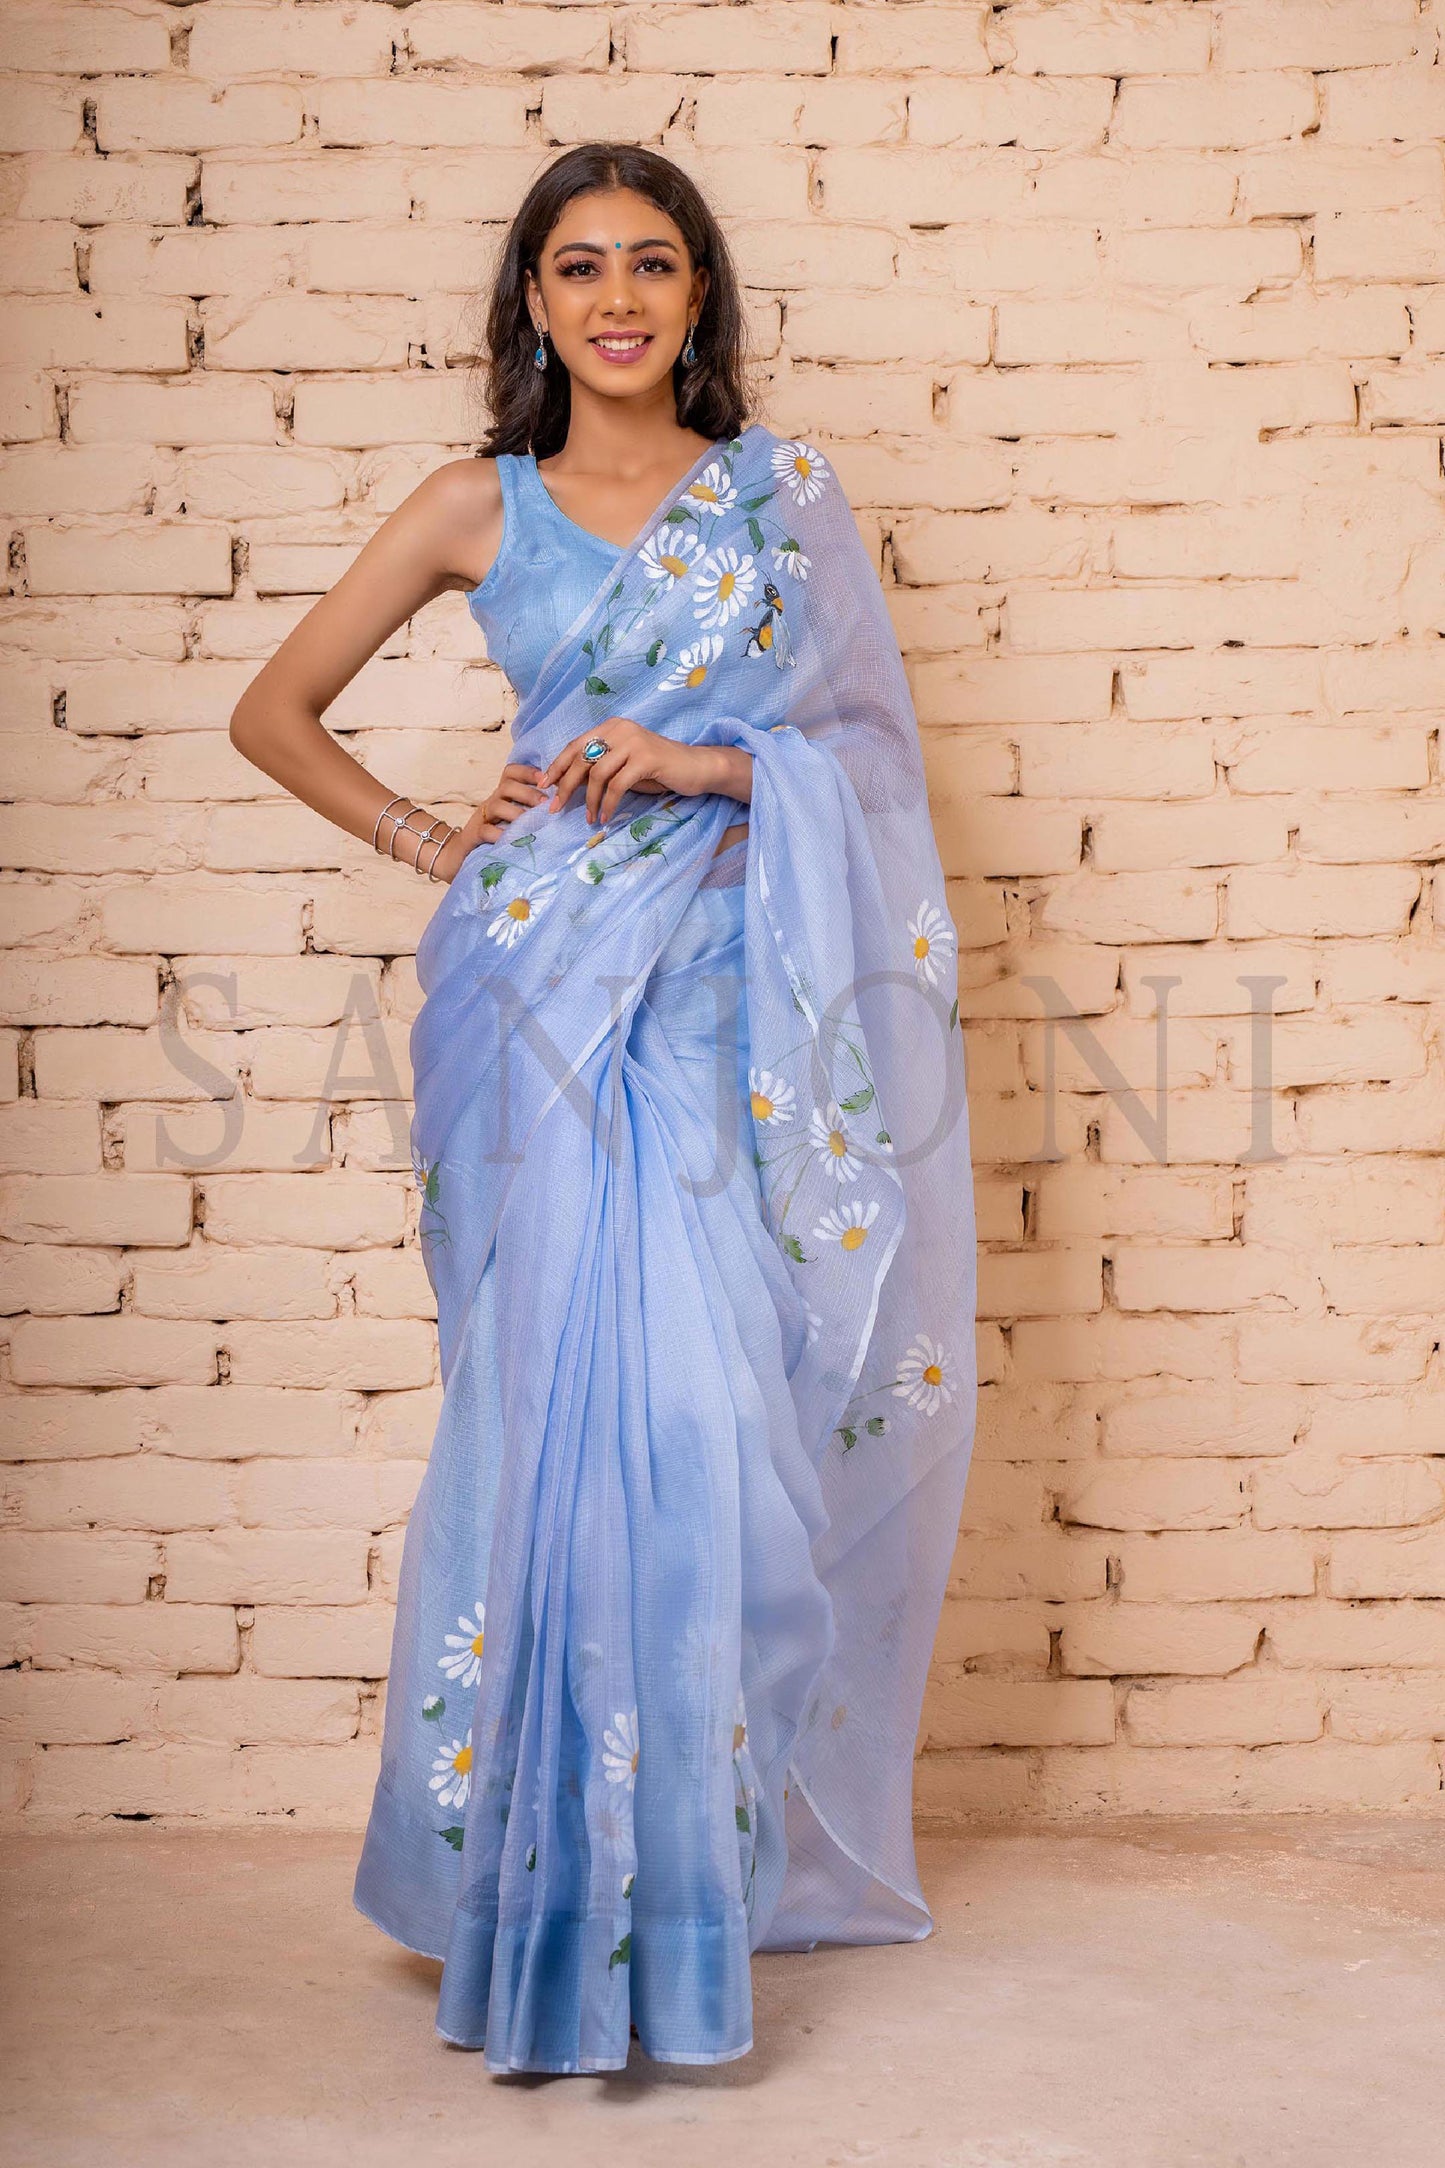 Exquisite hand-painted Kota Doria Silk Saree adorned with delicate white daisies, intricately enhanced with sequin and gota hand embroidery. A masterpiece of hand painting on saree, showcasing the elegance of pure Kota silk. This Kota saree is a timeless beauty that epitomizes artistry and grace.